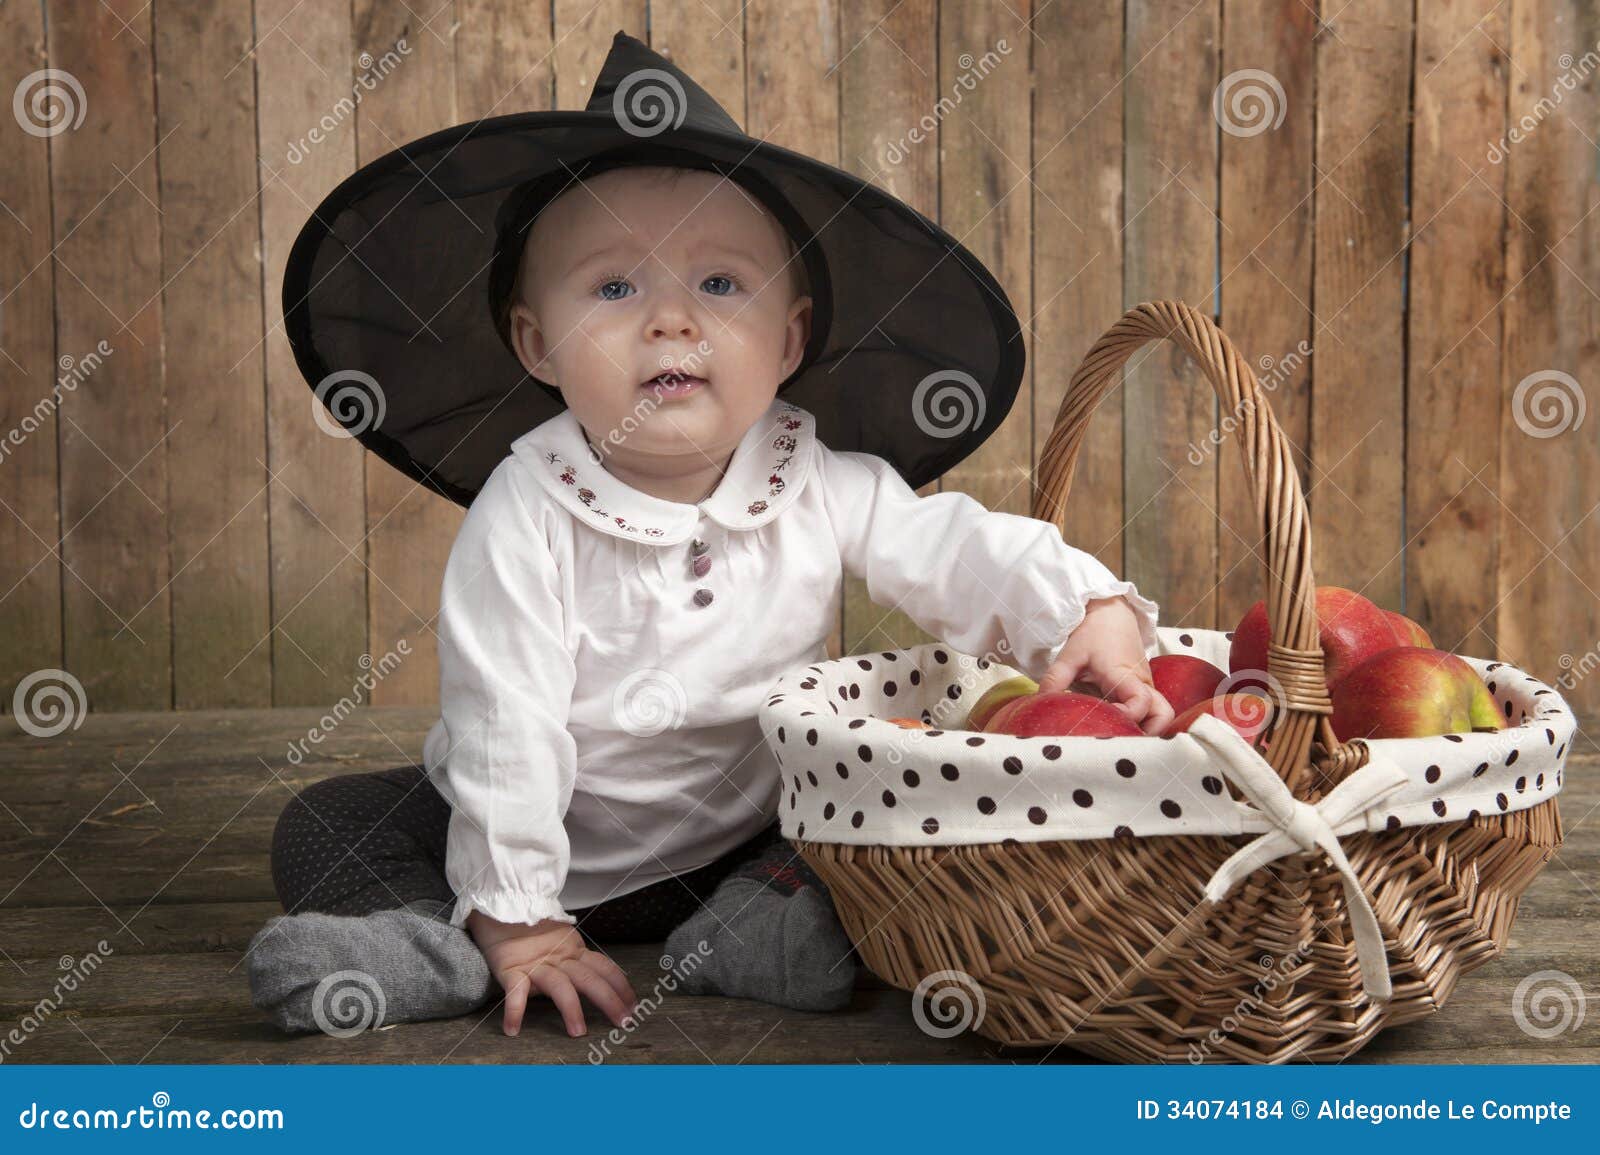 Adorable Baby with Halloween Hat and Apples Stock Photo - Image of ...